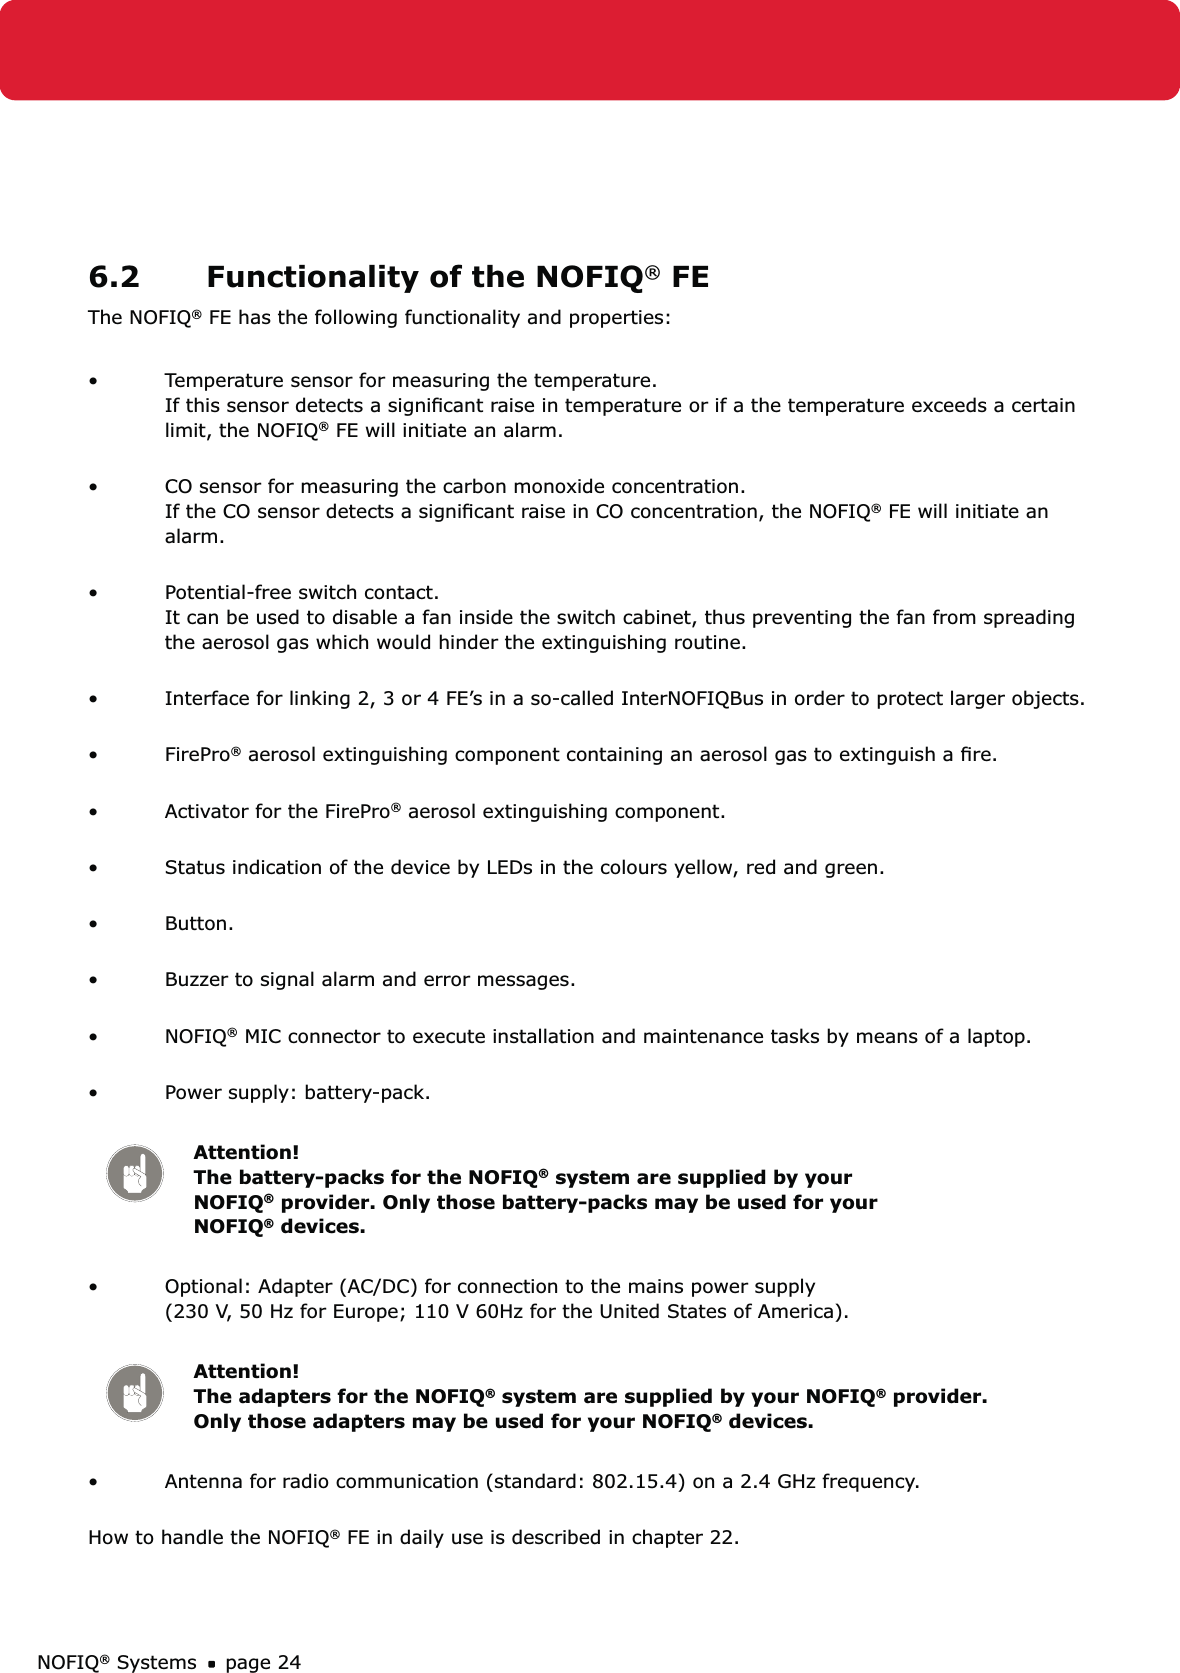 NOFIQ® Systems page 246.2  Functionality of the NOFIQ® FEThe NOFIQ® FE has the following functionality and properties:Temperature sensor for measuring the temperature. • If this sensor detects a signiﬁcant raise in temperature or if a the temperature exceeds a certain limit, the NOFIQ® FE will initiate an alarm. CO sensor for measuring the carbon monoxide concentration. • If the CO sensor detects a signiﬁcant raise in CO concentration, the NOFIQ® FE will initiate an alarm. Potential-free switch contact. • It can be used to disable a fan inside the switch cabinet, thus preventing the fan from spreading the aerosol gas which would hinder the extinguishing routine. Interface for linking 2, 3 or 4 FE’s in a so-called InterNOFIQBus in order to protect larger objects. • FirePro•  ® aerosol extinguishing component containing an aerosol gas to extinguish a ﬁre.  Activator for the FirePro•  ® aerosol extinguishing component. Status indication of the device by LEDs in the colours yellow, red and green. • Button. • Buzzer to signal alarm and error messages. • NOFIQ•  ® MIC connector to execute installation and maintenance tasks by means of a laptop. Power supply: battery-pack. • Attention! The battery-packs for the NOFIQ® system are supplied by your NOFIQ® provider. Only those battery-packs may be used for your NOFIQ® devices.Optional: Adapter (AC/DC) for connection to the mains power supply  • (230 V, 50 Hz for Europe; 110 V 60Hz for the United States of America). Attention! The adapters for the NOFIQ® system are supplied by your NOFIQ® provider. Only those adapters may be used for your NOFIQ® devices.Antenna for radio communication (standard: 802.15.4) on a 2.4 GHz frequency.•  How to handle the NOFIQ® FE in daily use is described in chapter 22.